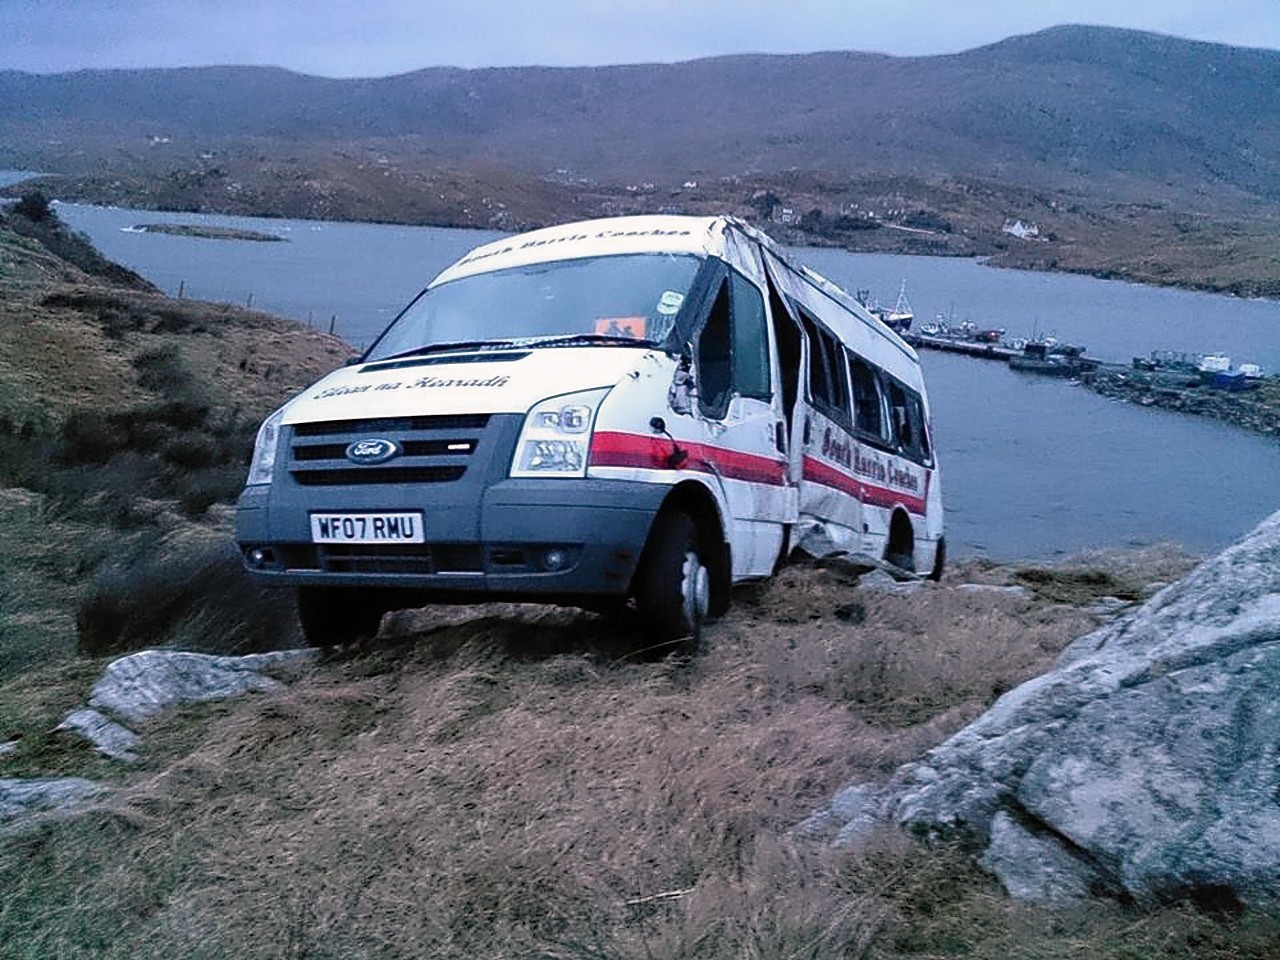 The 16-seater minibus hanging over the edge of the cliff on Isle of Scalpay